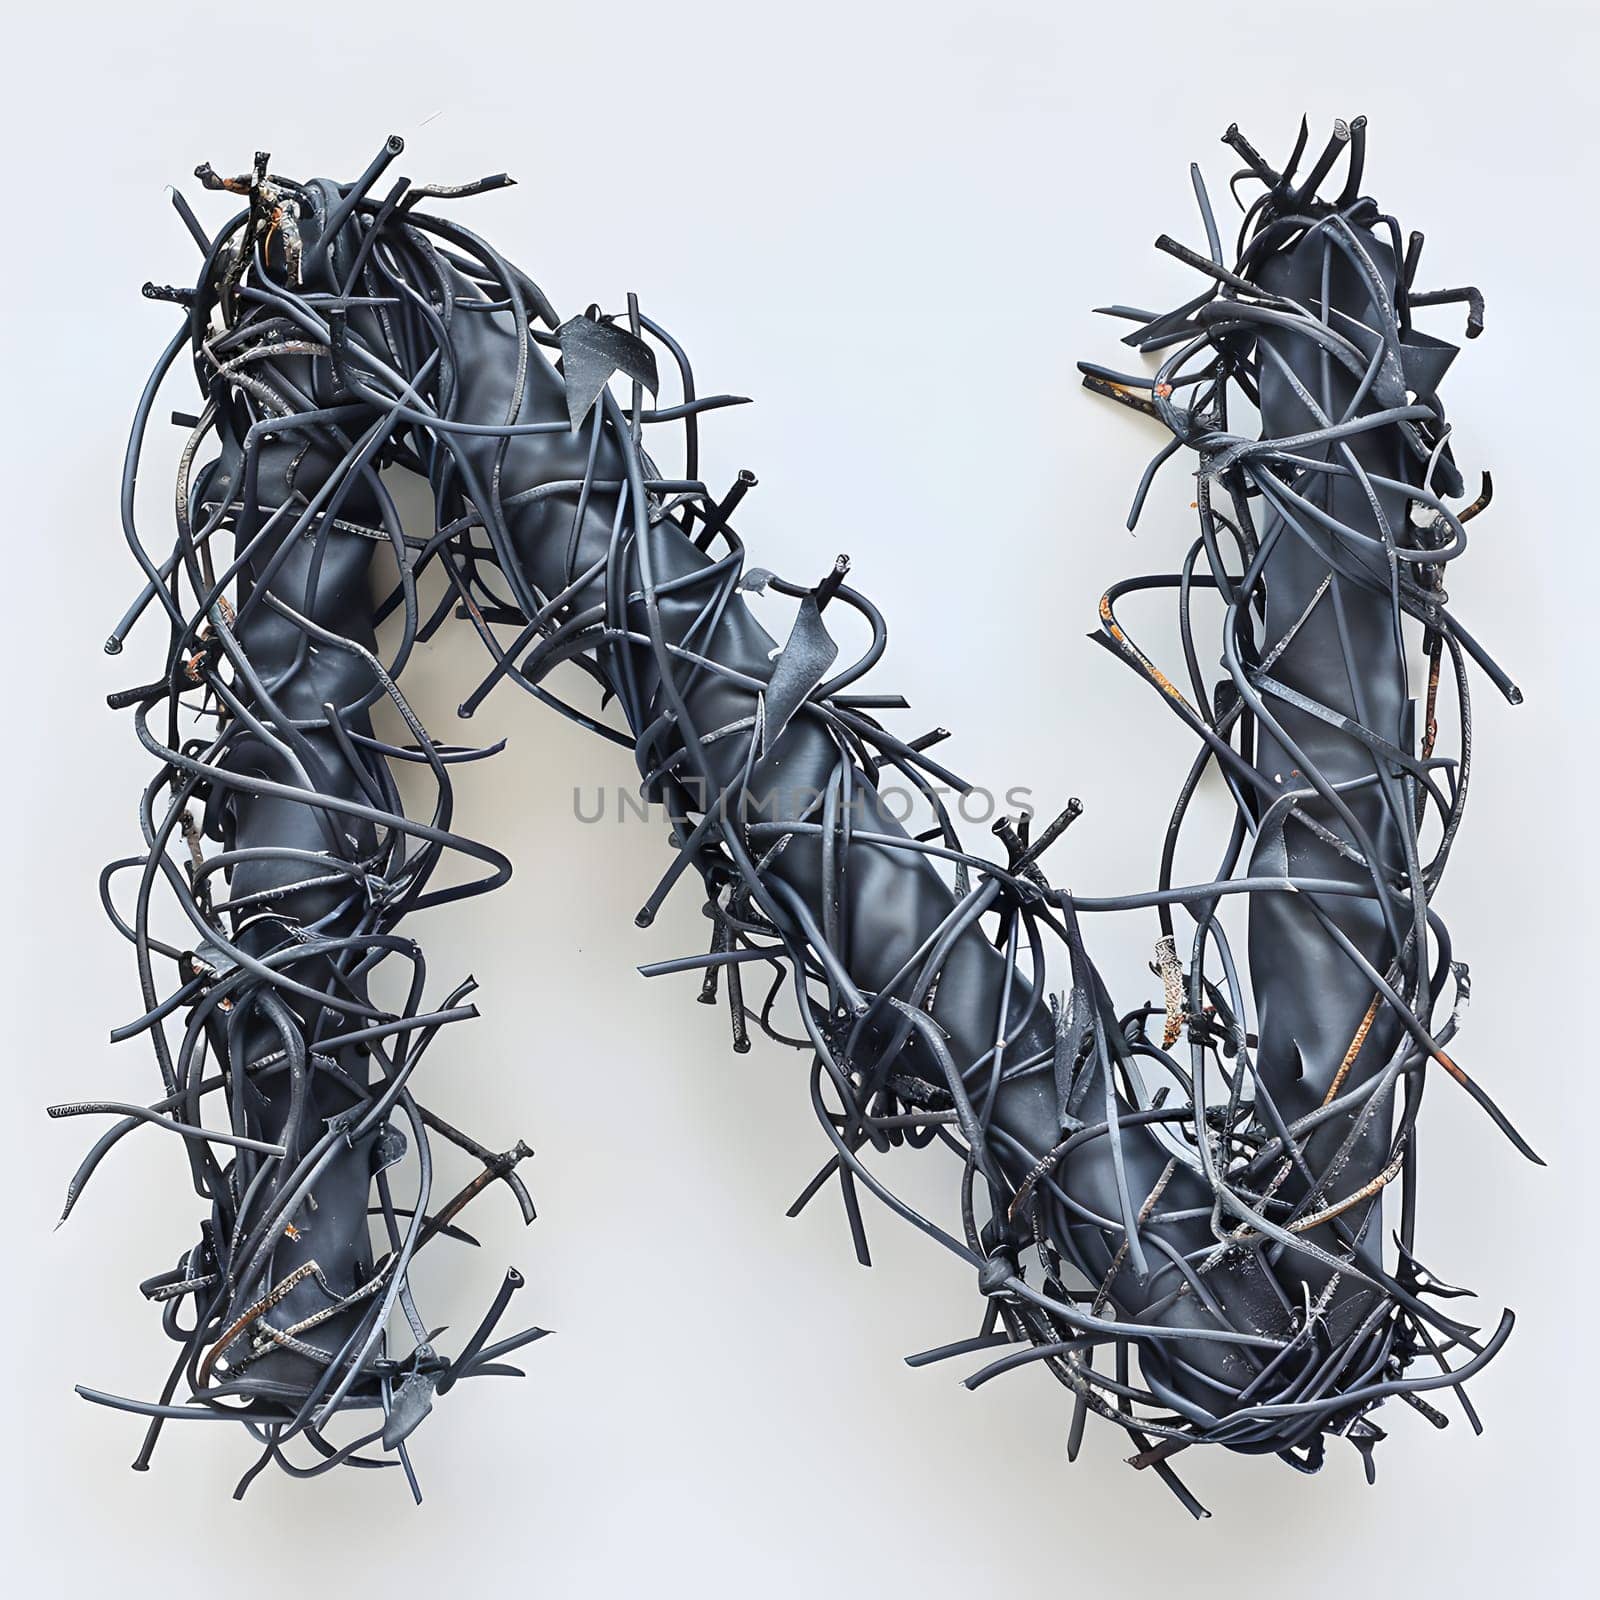 The letter n is crafted from barbed wire in an environmental art installation by Nadtochiy